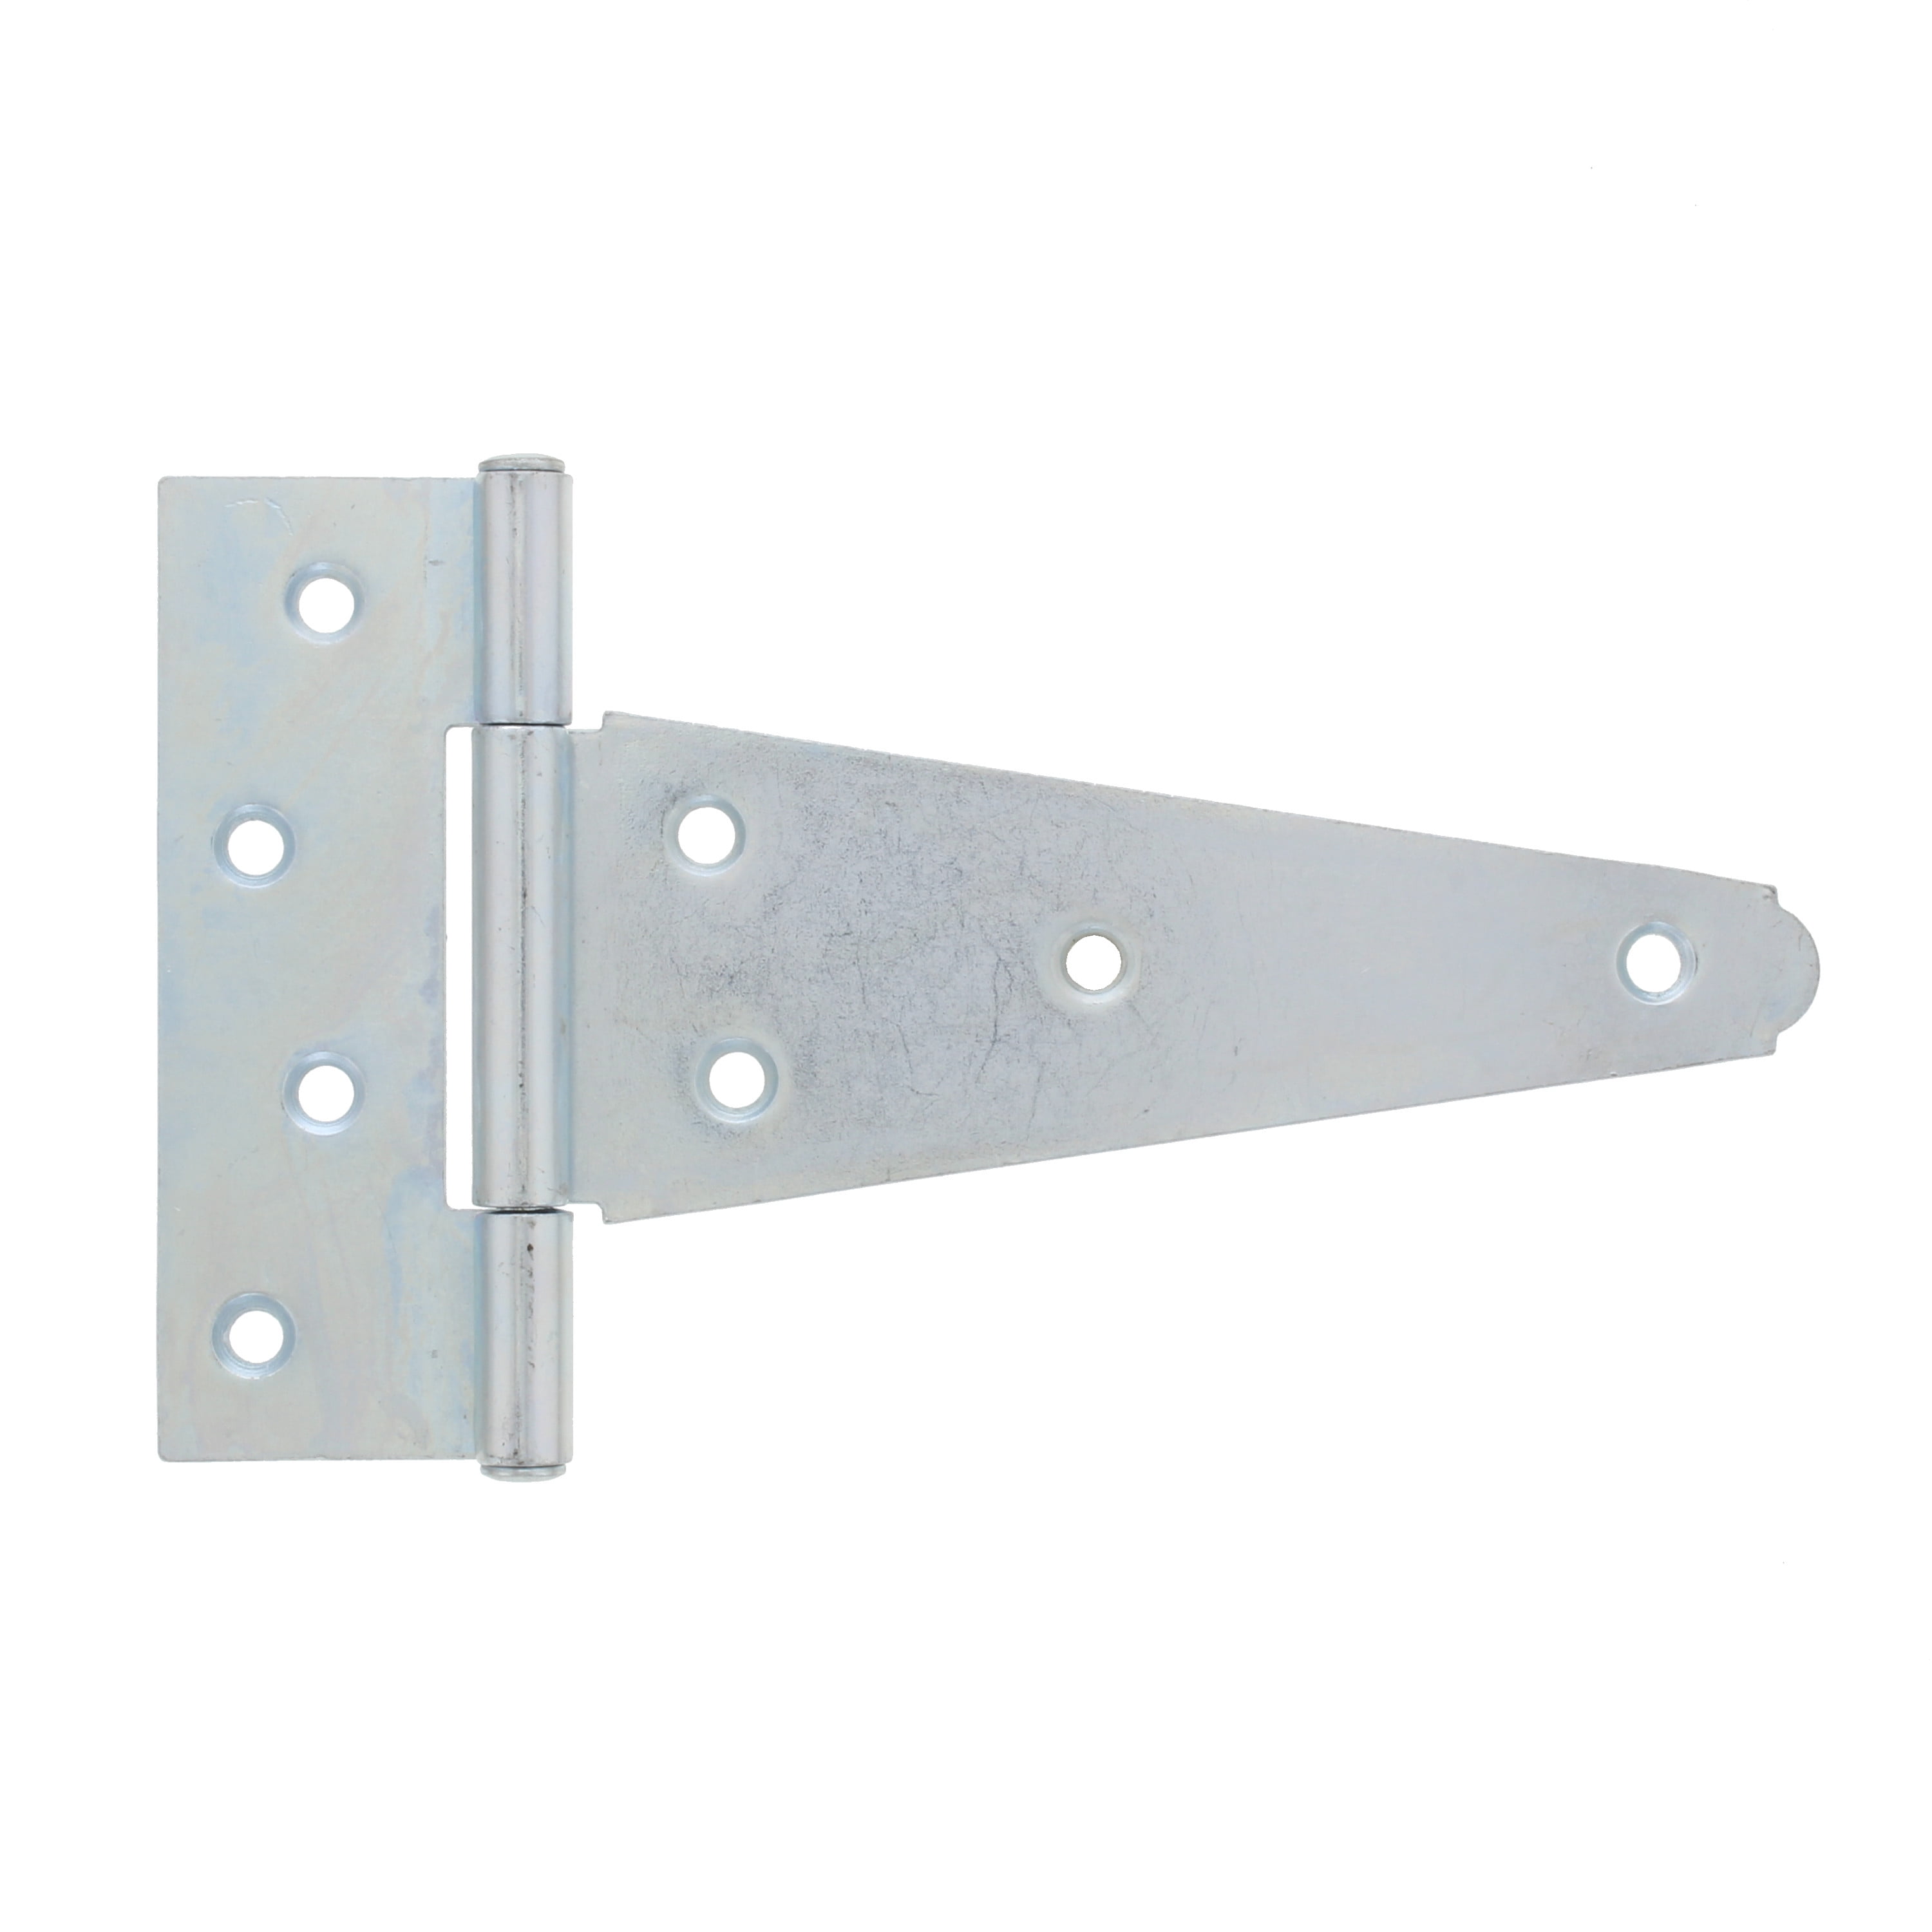 8" Weighty Scotch Stainless Steel Tee Hinges 